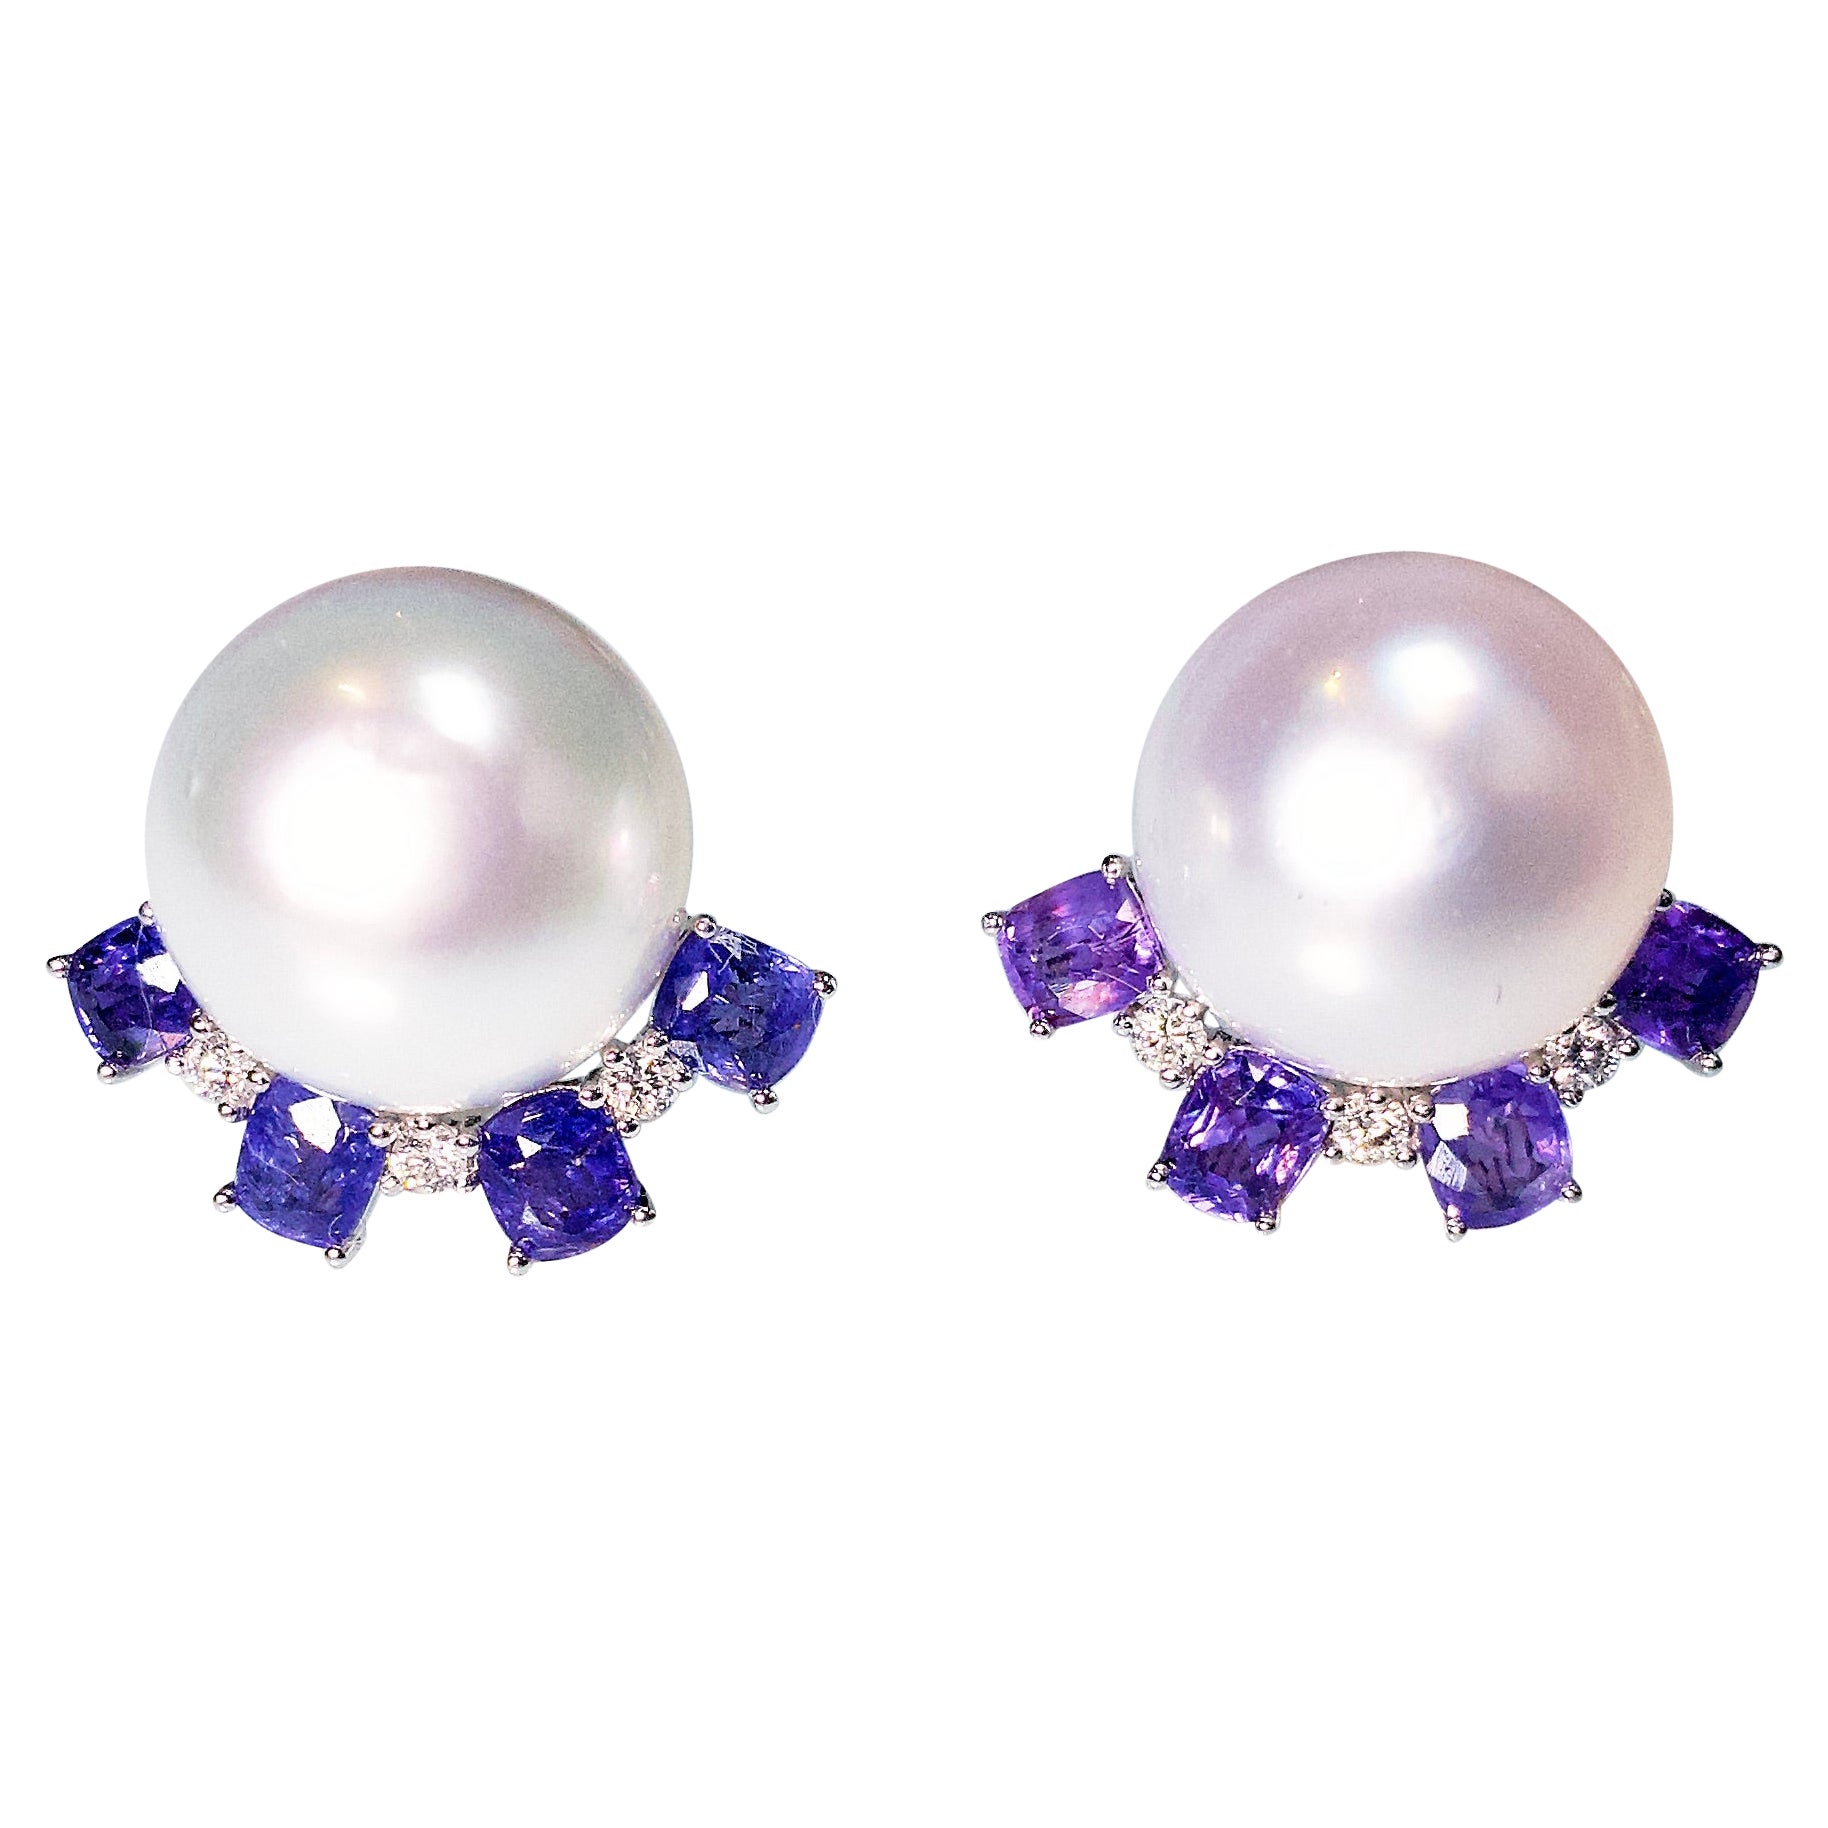 3.2 Ct Purple Sapphire, South Sea Pearl and Diamond Earring in 18k White Gold